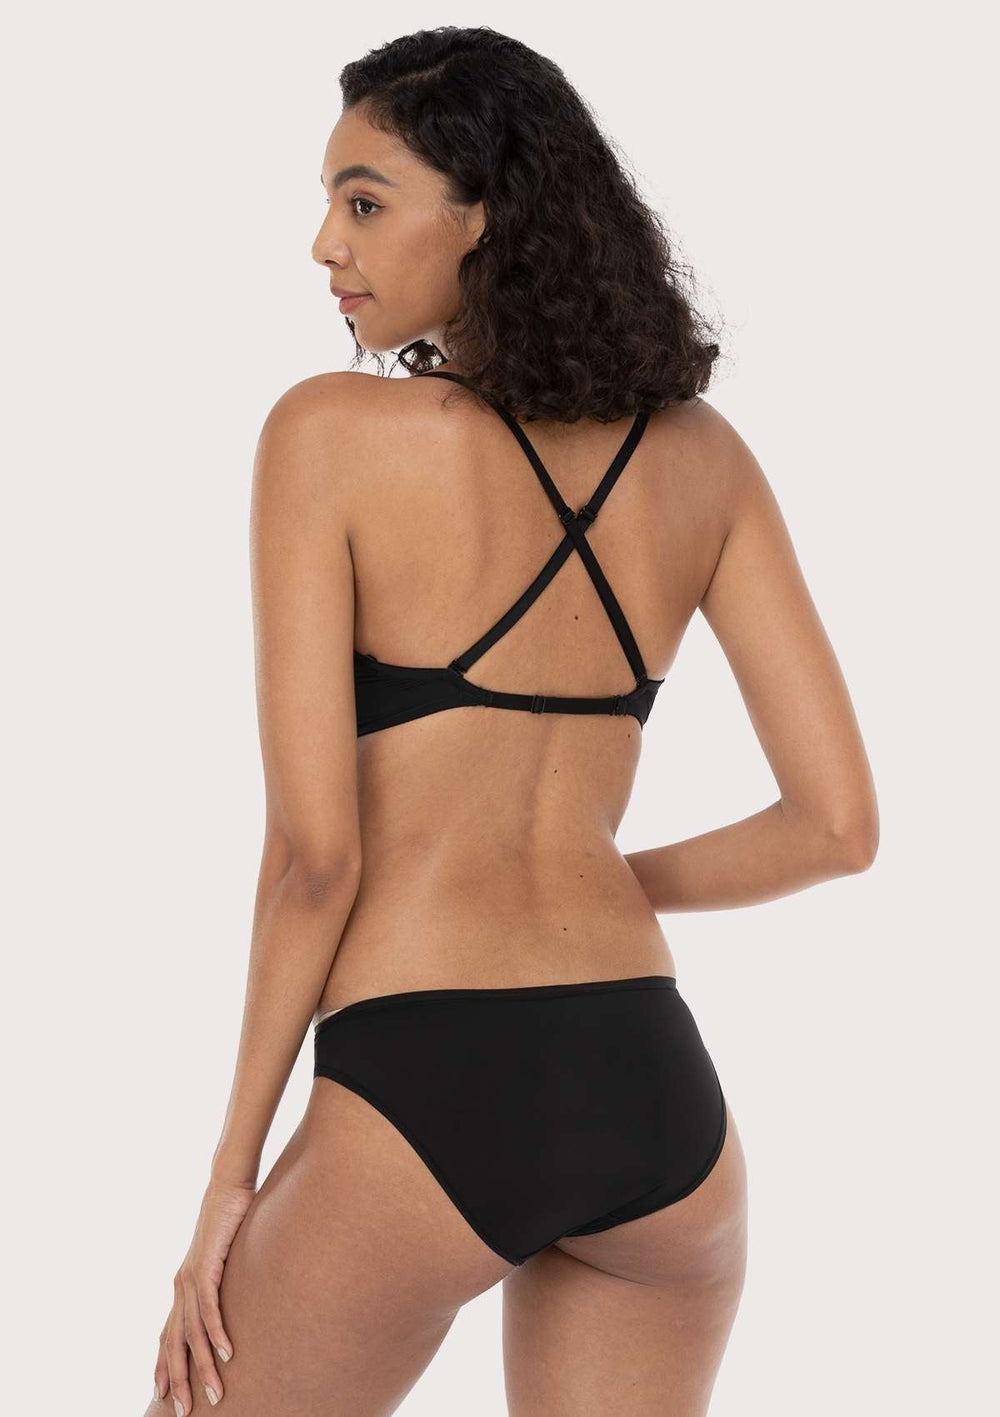  sealsea Low Back Bra Wire Lifting Deep V Plunge Low